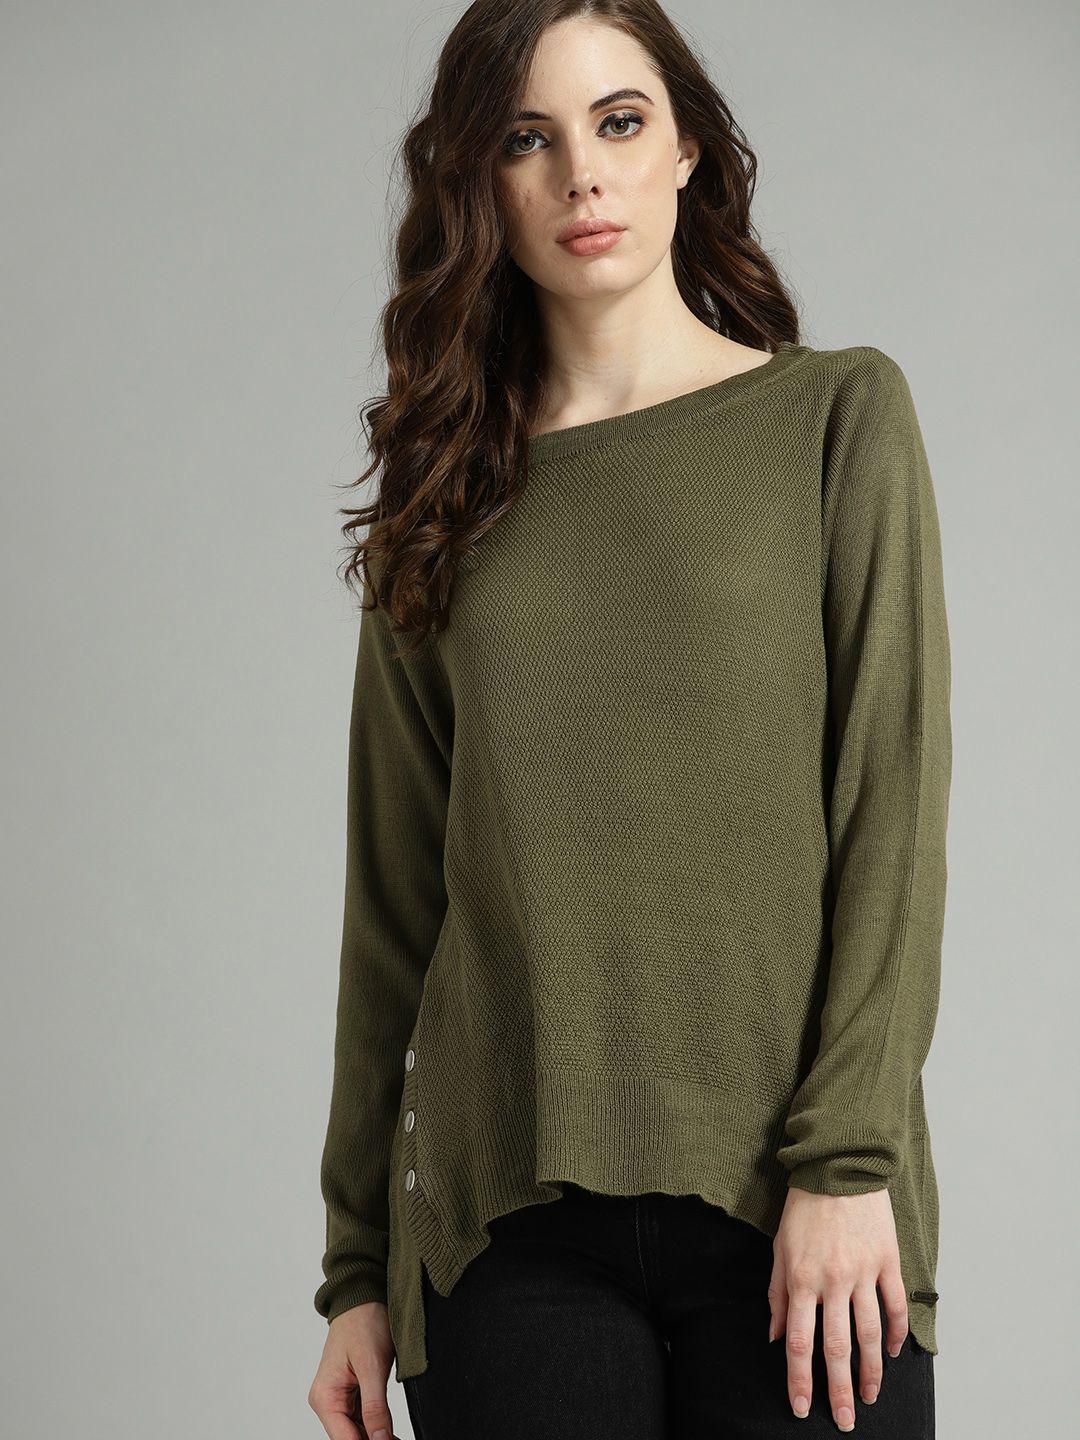 Roadster Women Olive Green Solid Sweater